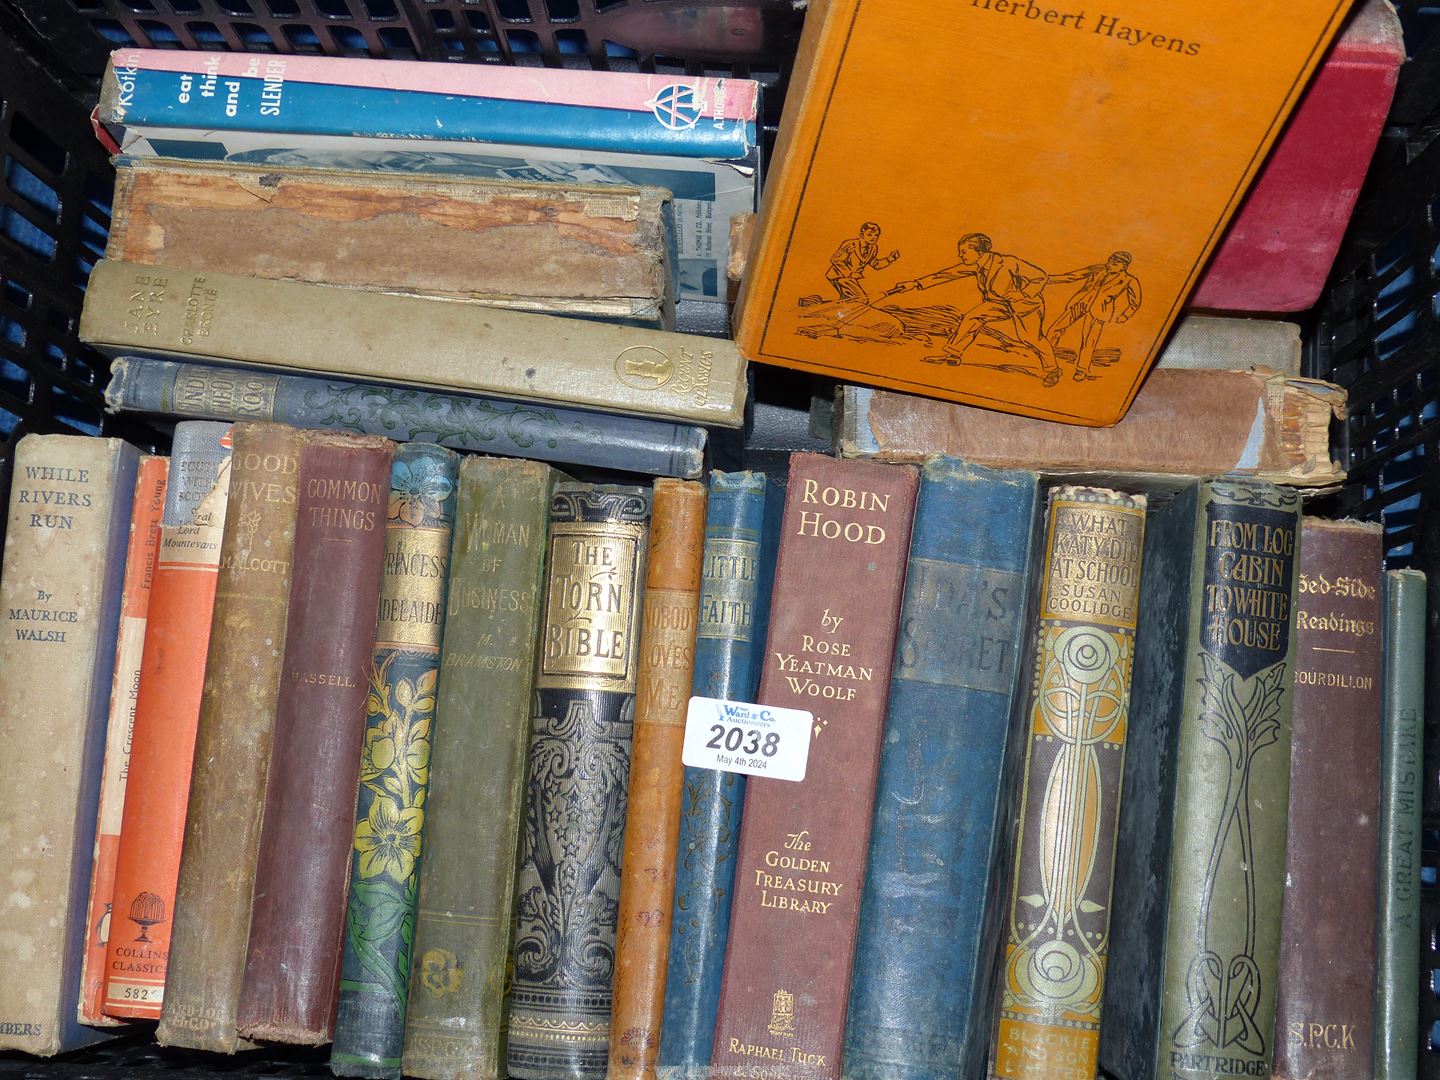 A crate of books, Tom Brown's School Days, Jane Eyre, Little Faith, The Heart-shaped Ruby etc.